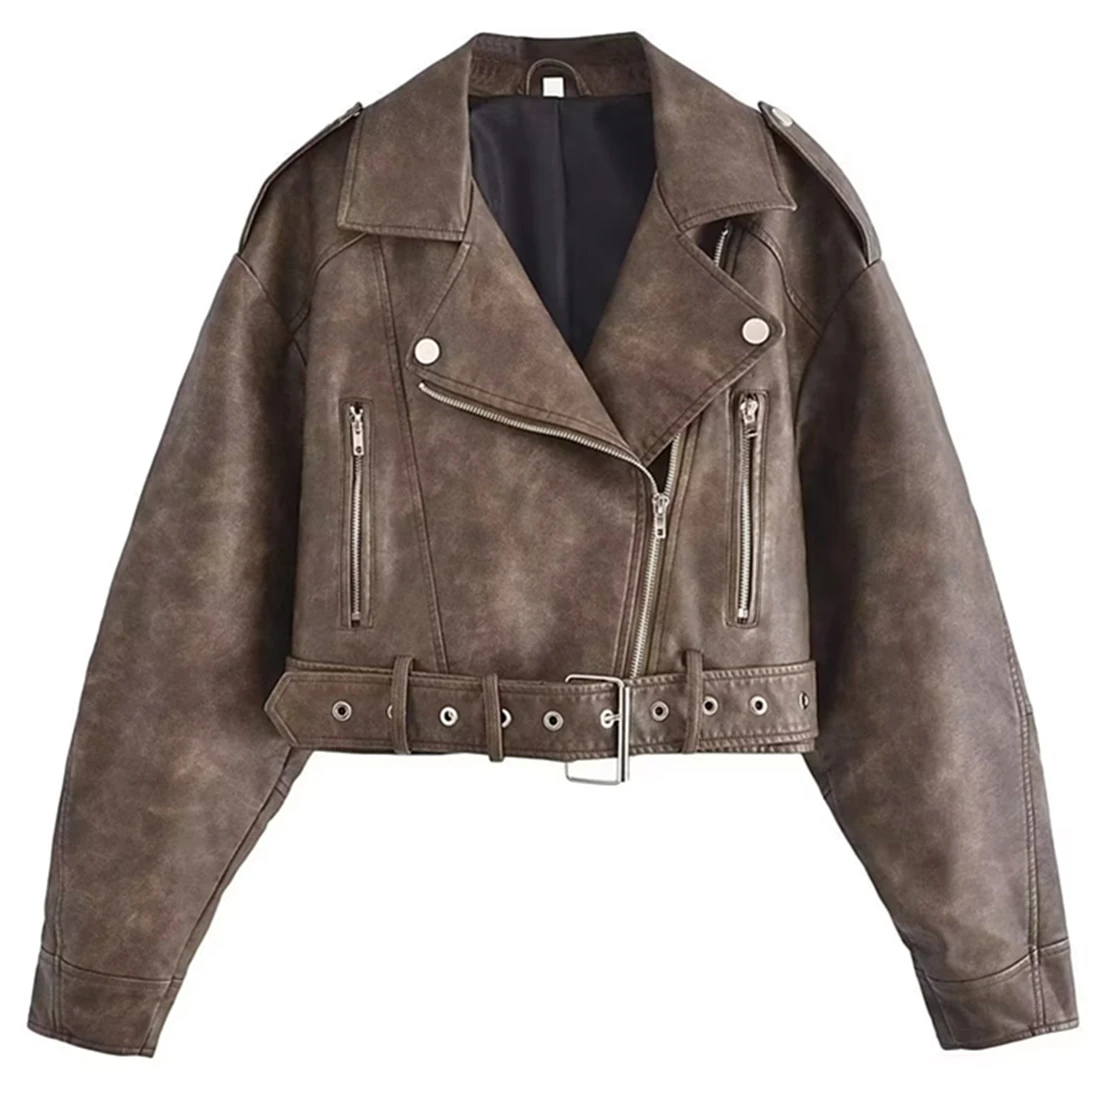 Dave&Di Vintage Washed Leather Jacket Loose Zippers Jacket Coat